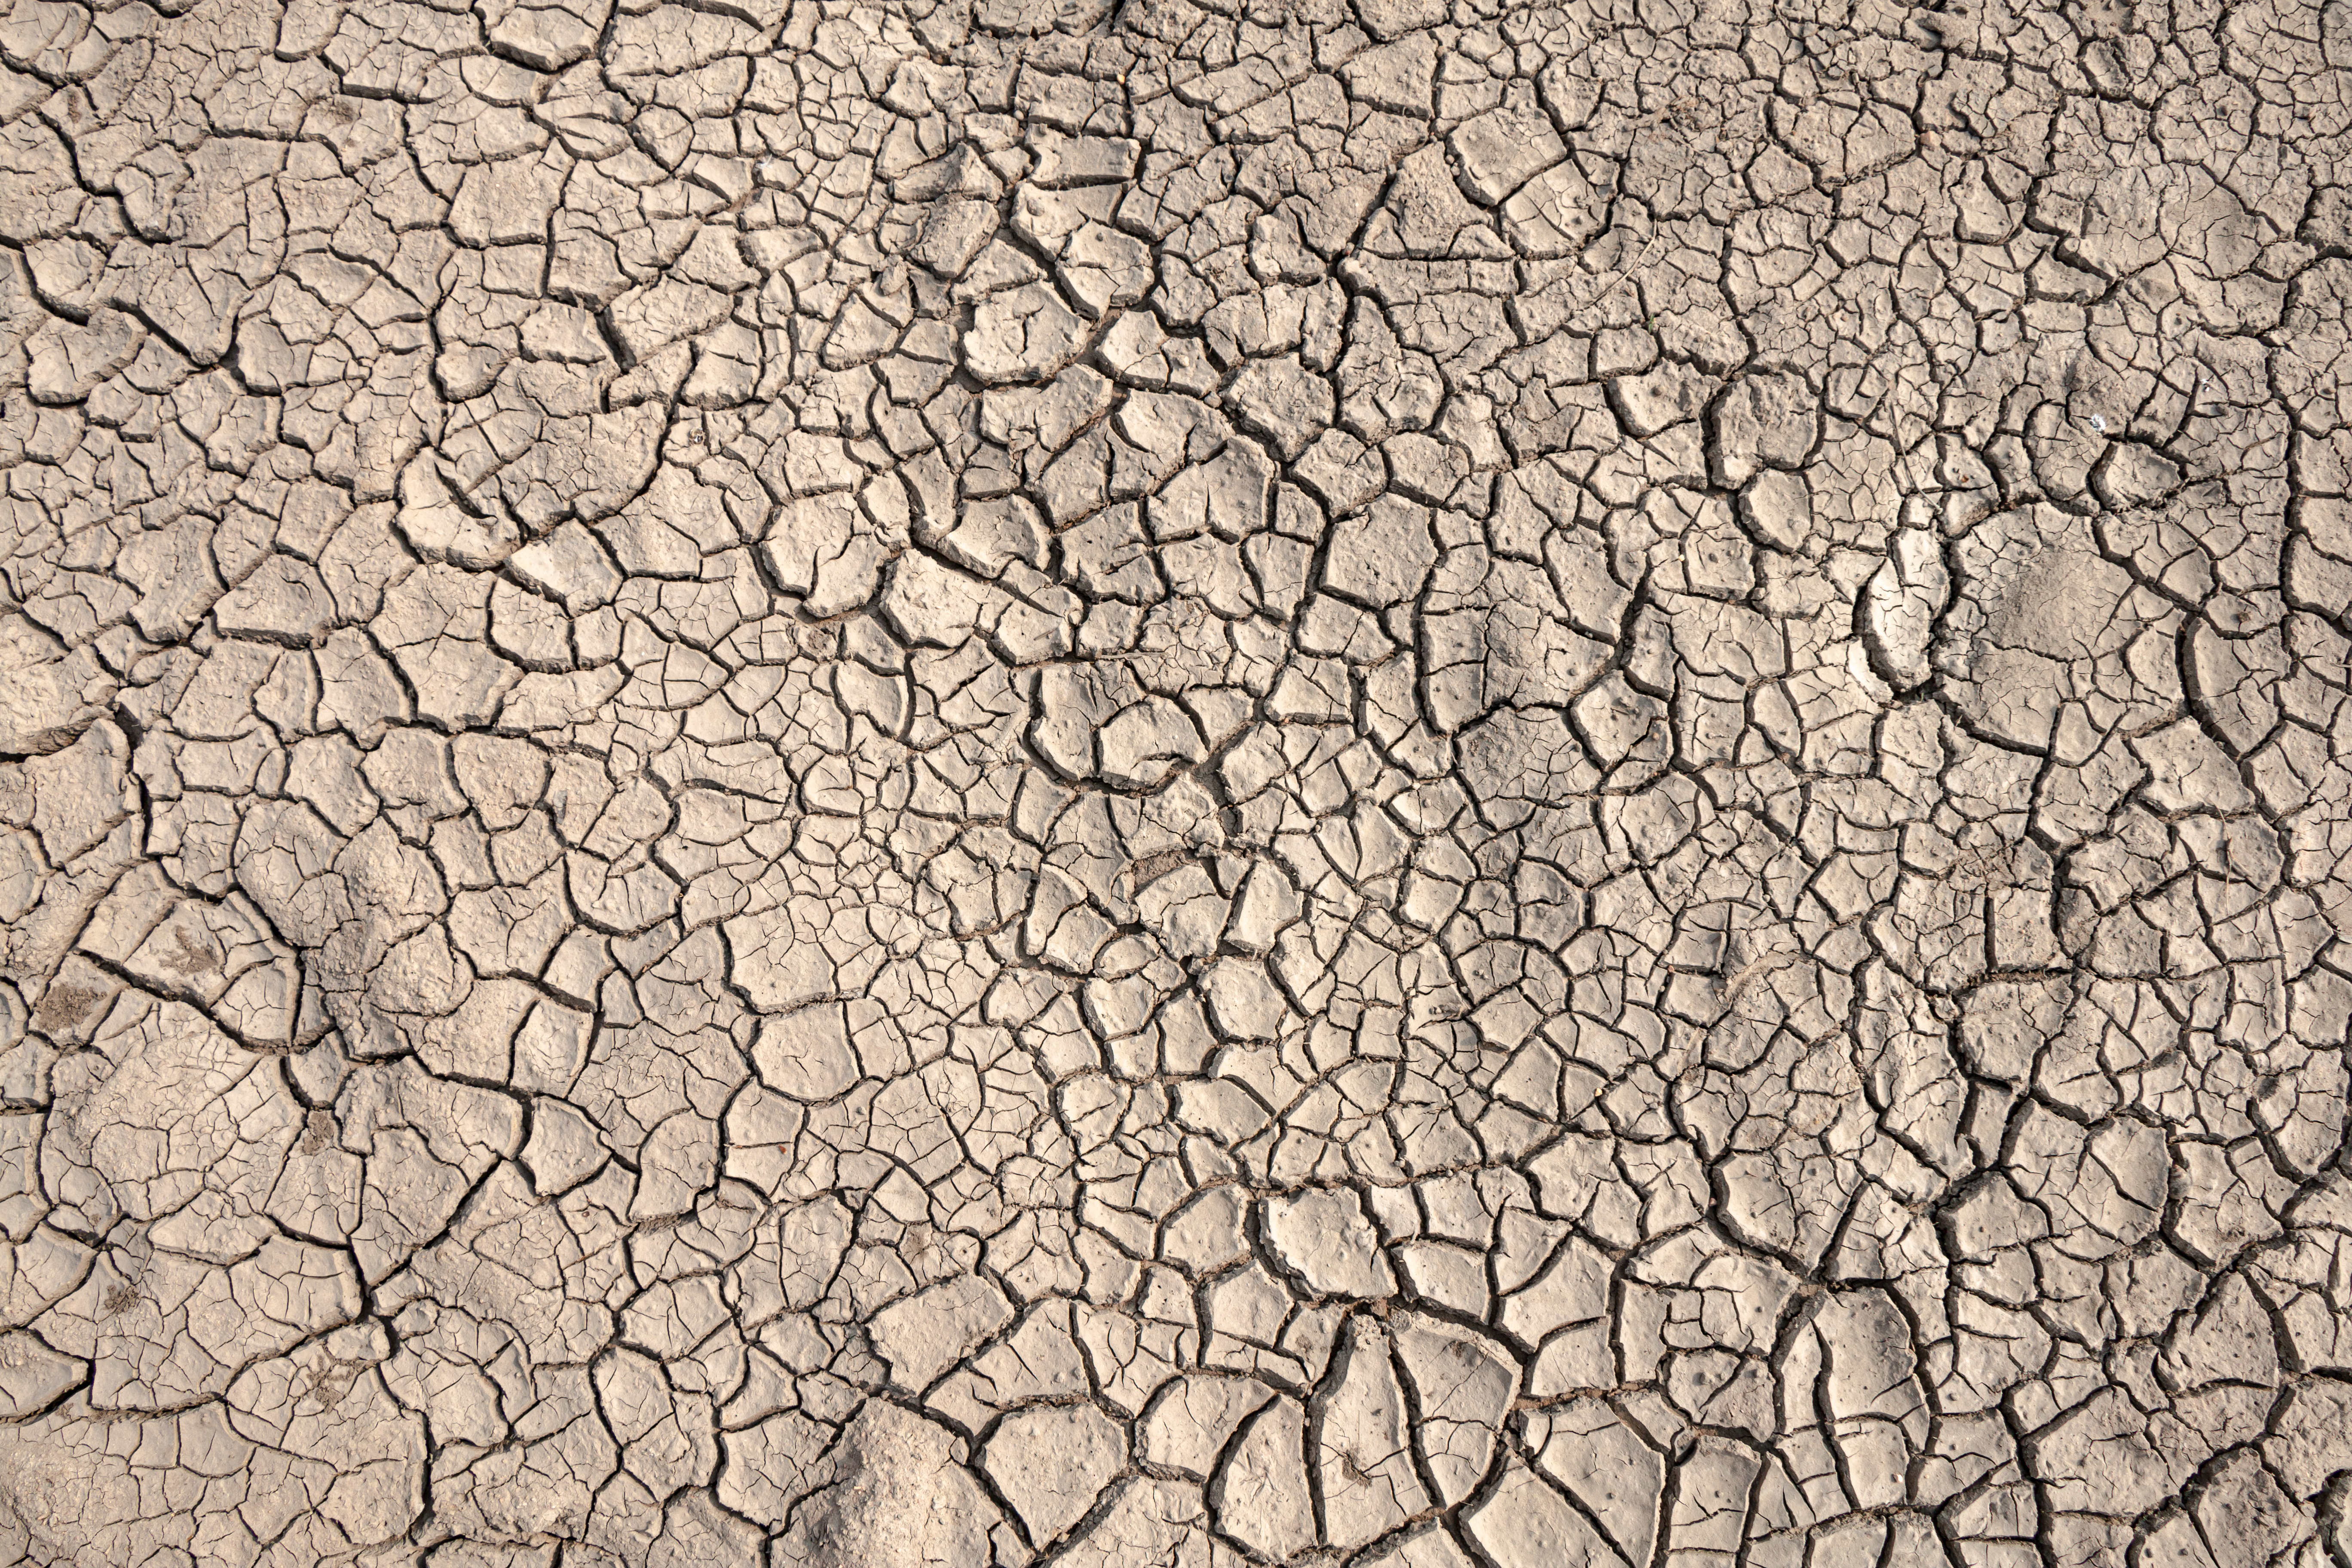 Drought conditions threaten the economy and ecosystems in South America